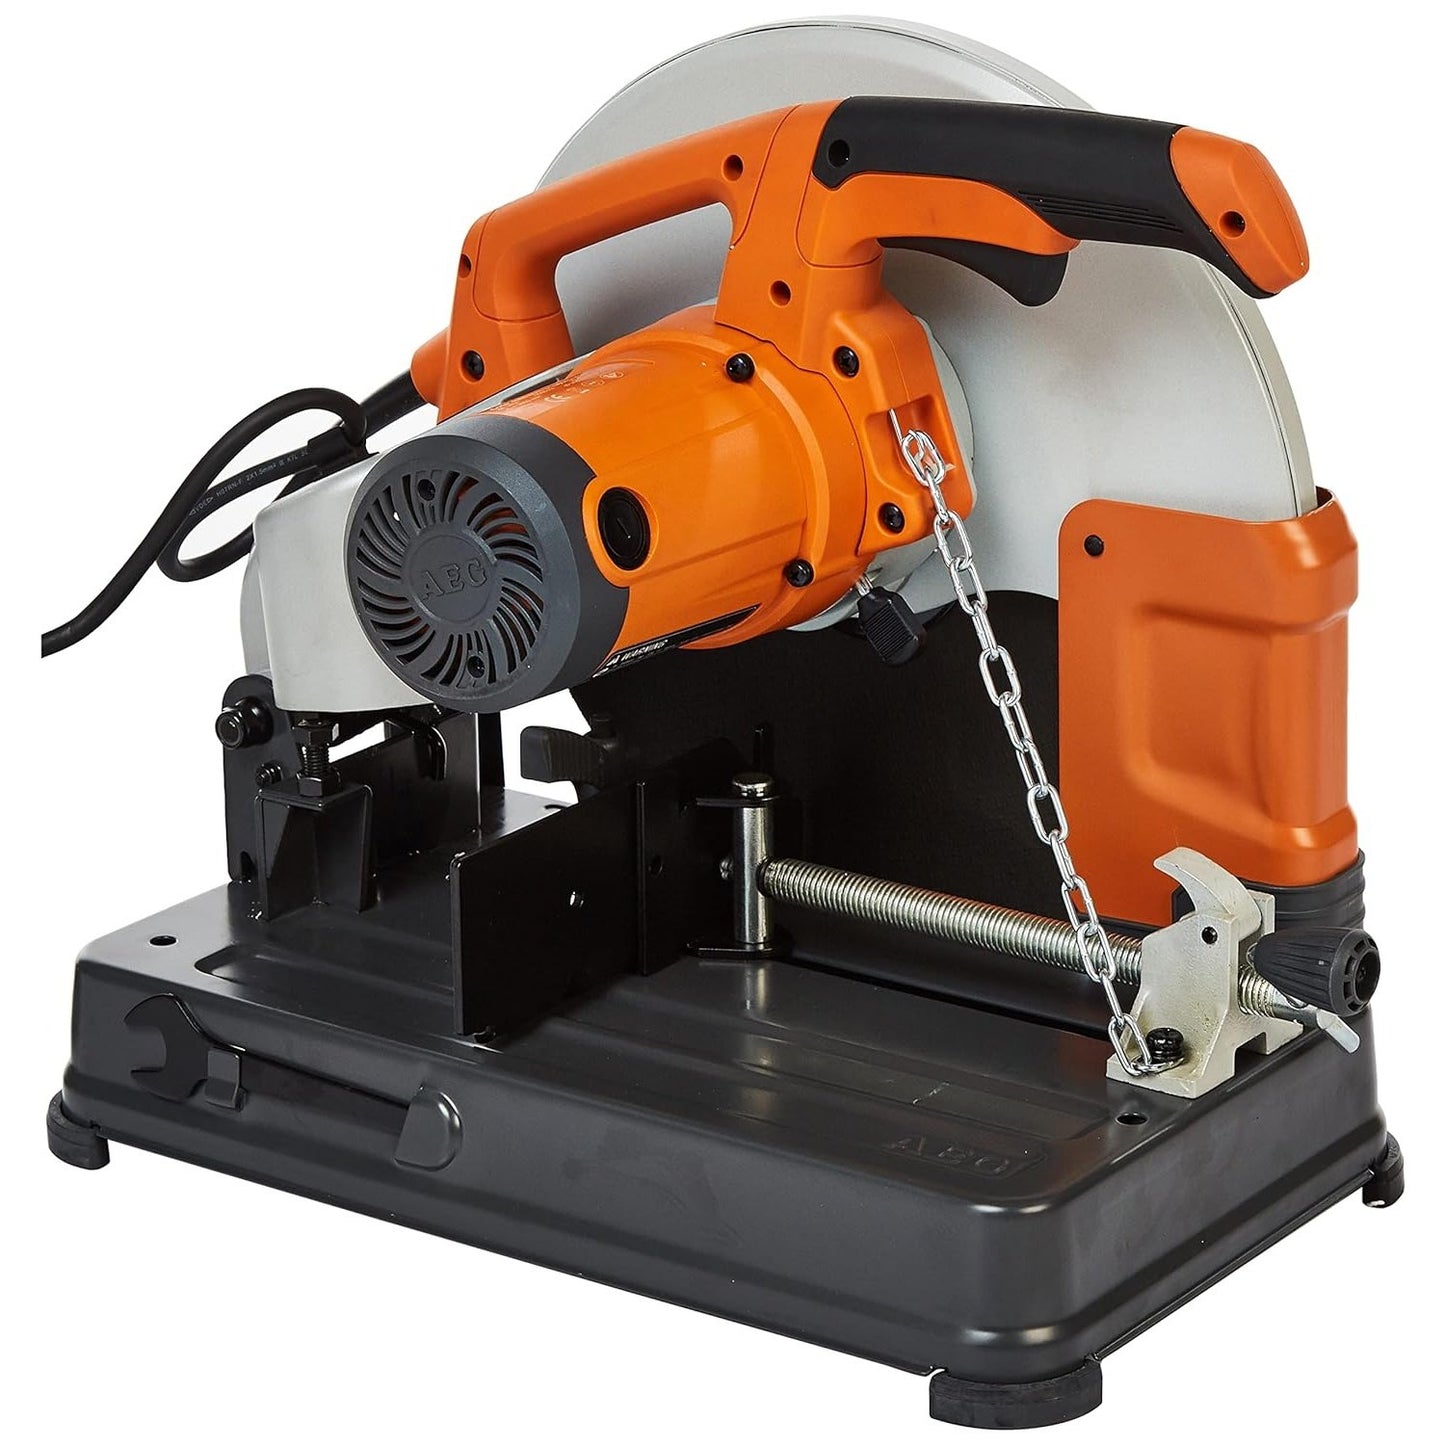 AEG 14"/355mm Cut-Off Chop Saw 2300W - SMT355 | Supply Master Accra, Ghana Bench & Stationary Tool Buy Tools hardware Building materials